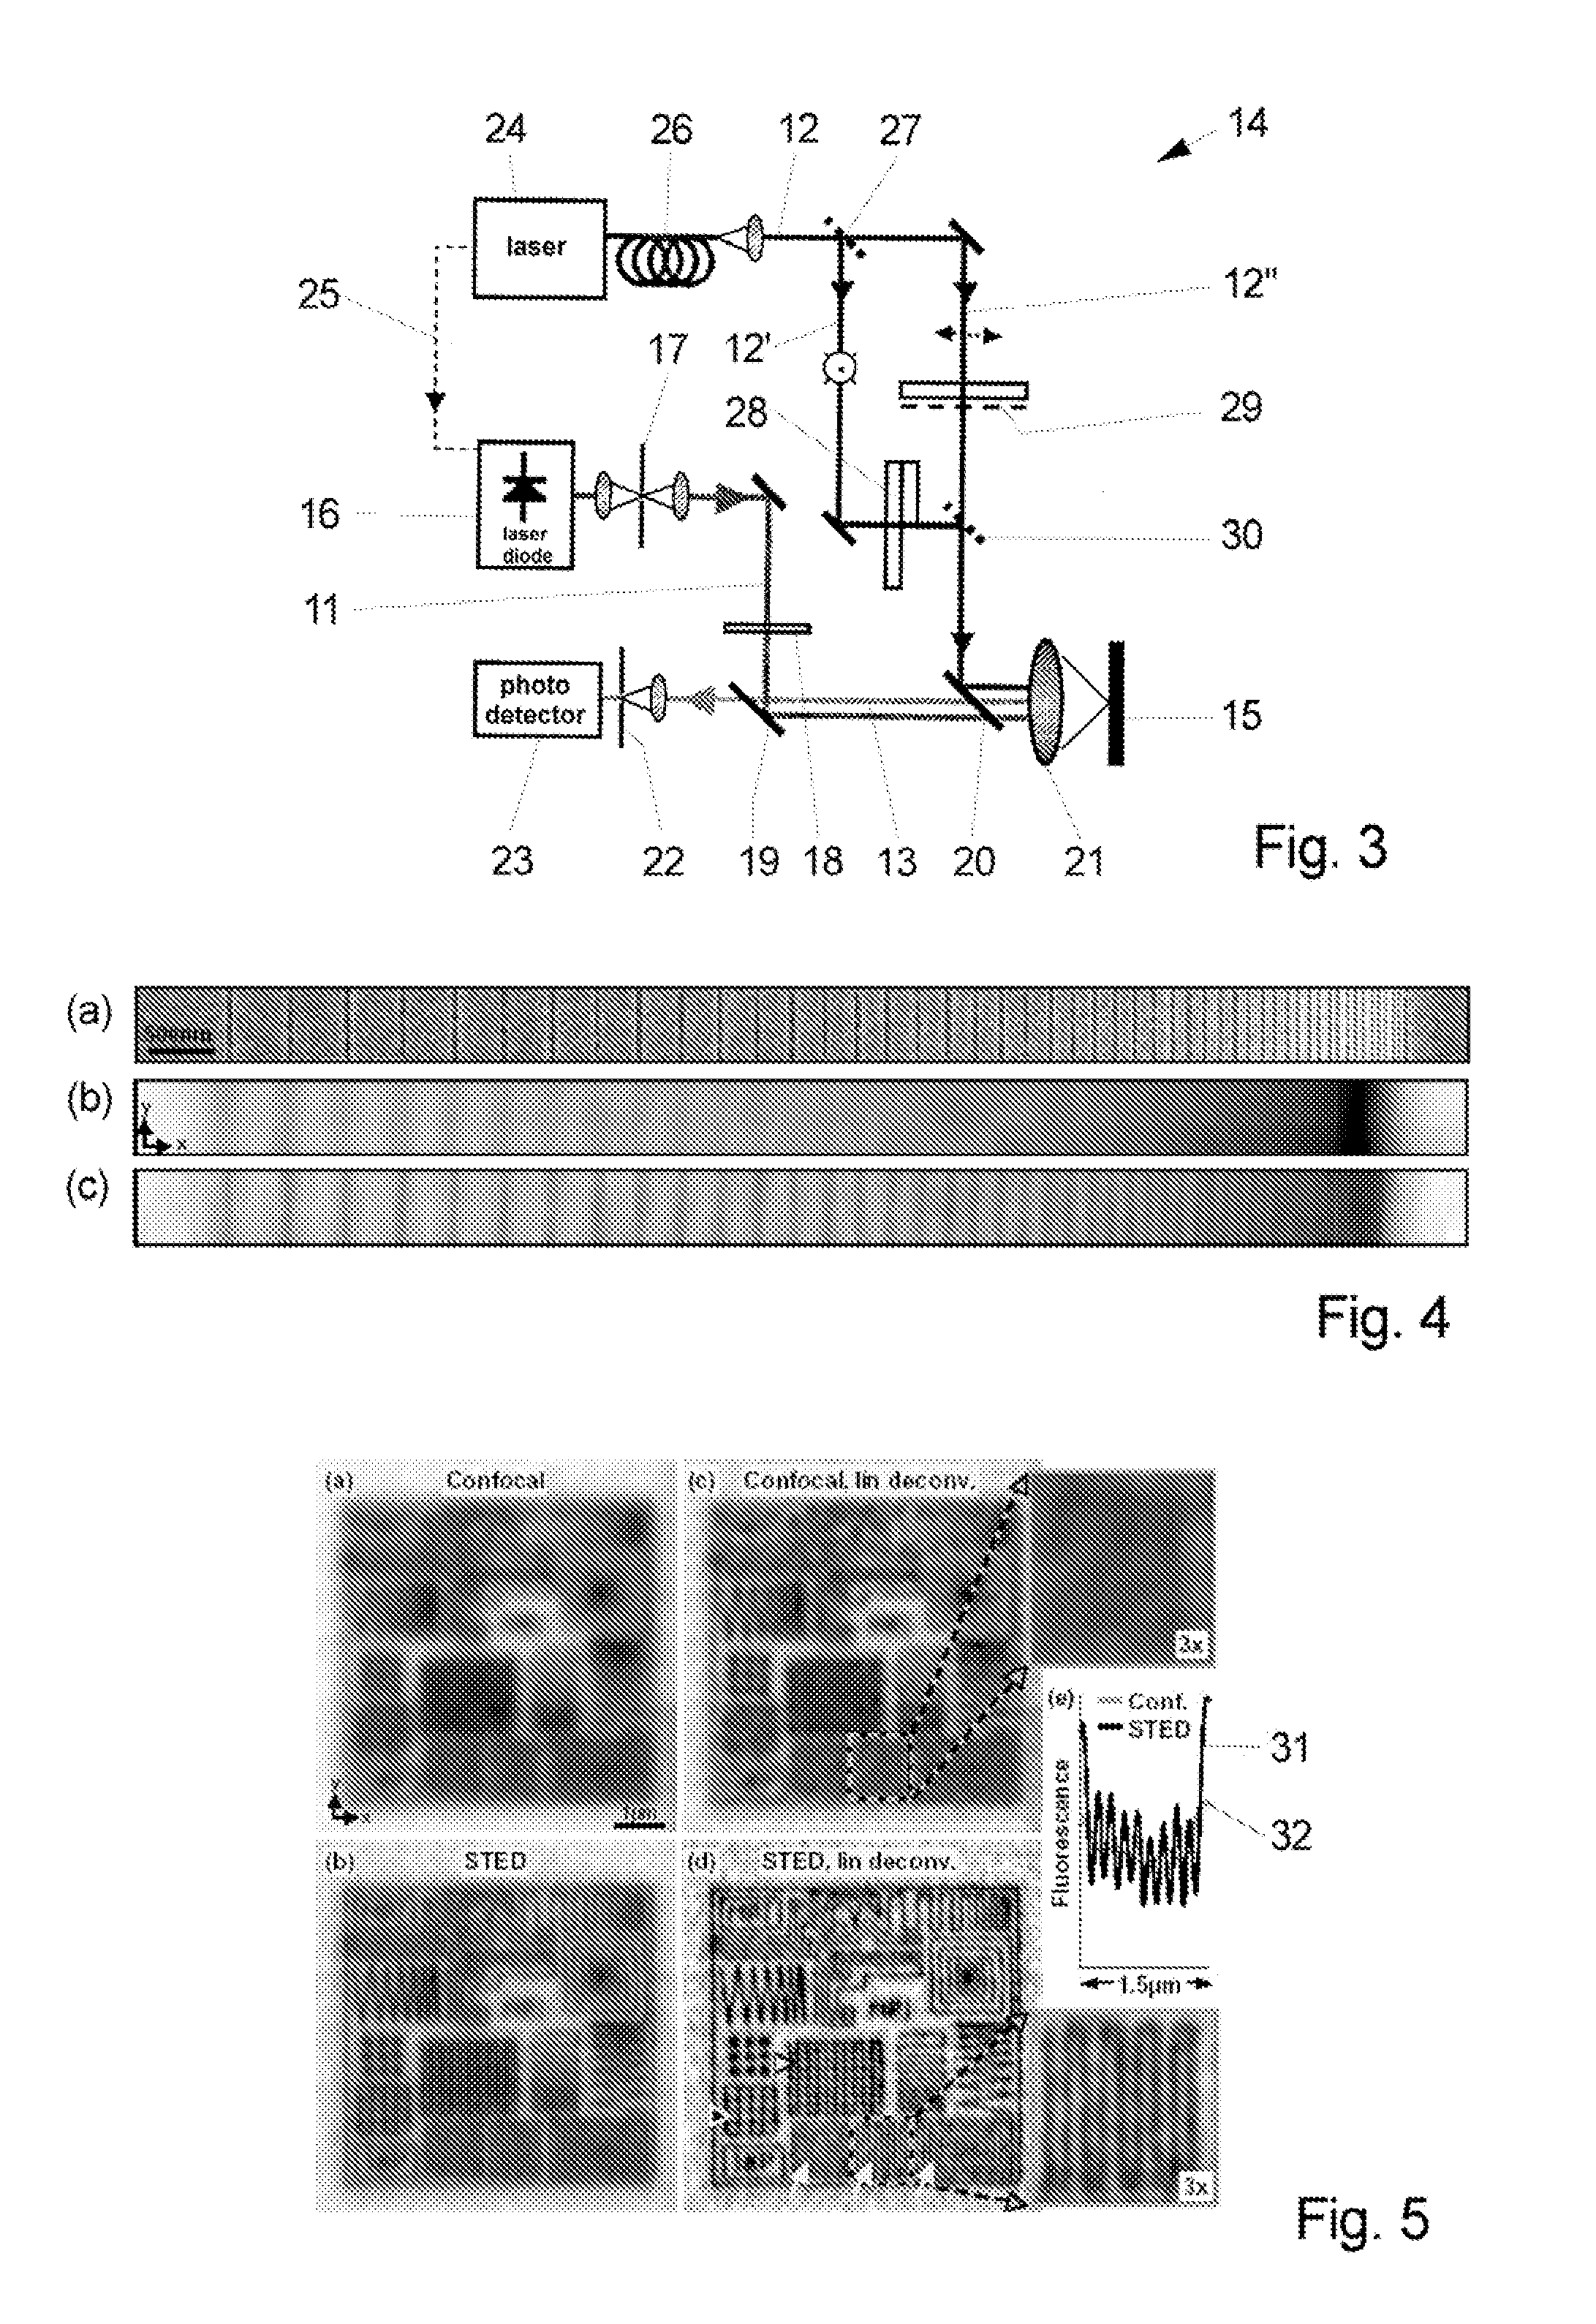 Method of producing spatial fine structures